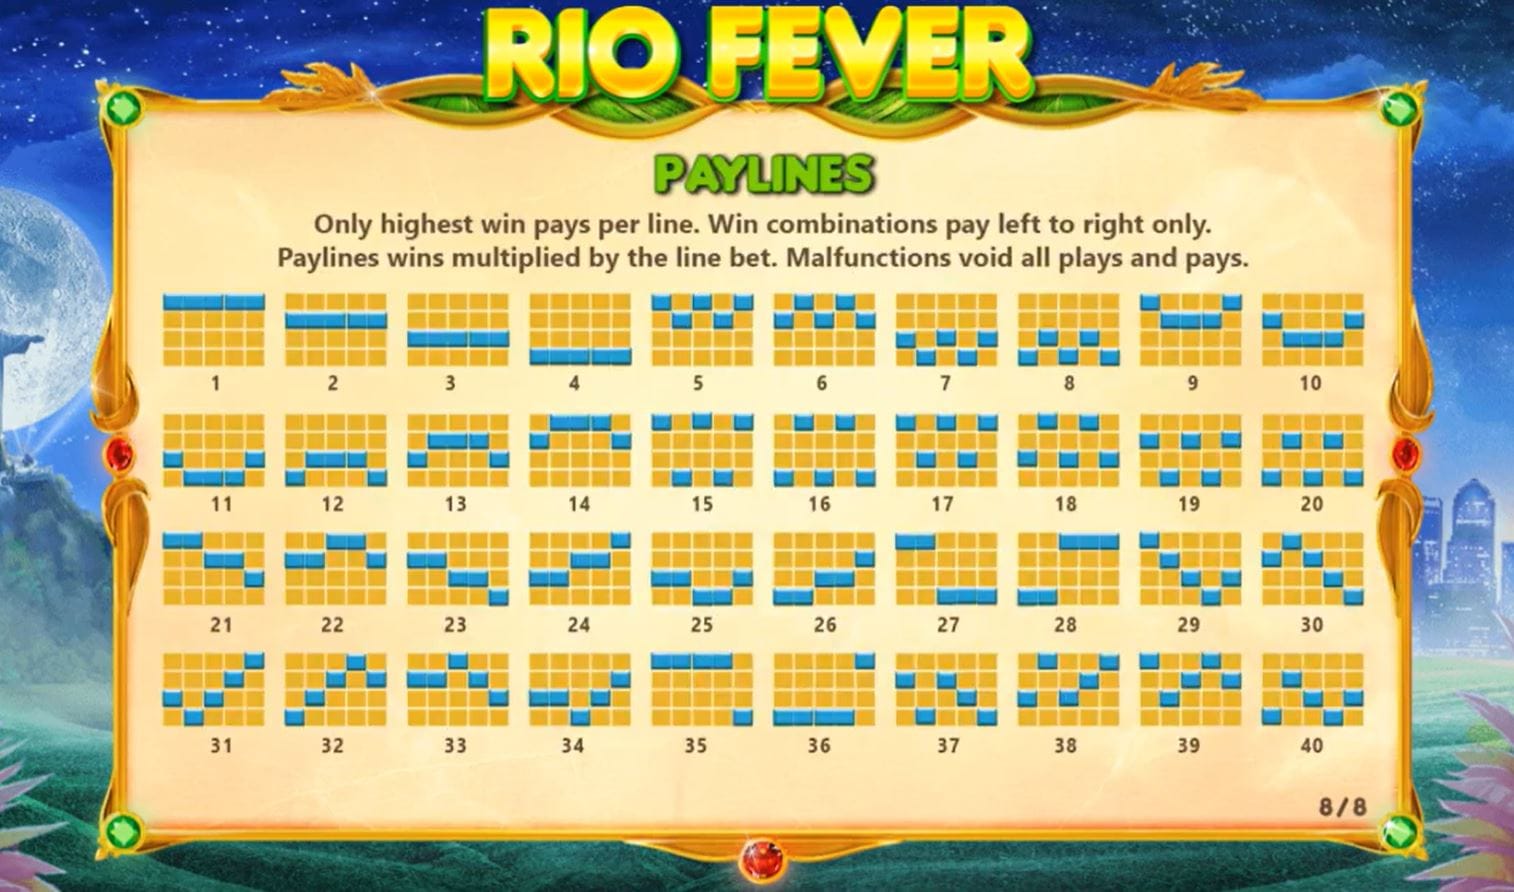 Rio Fever Paylines